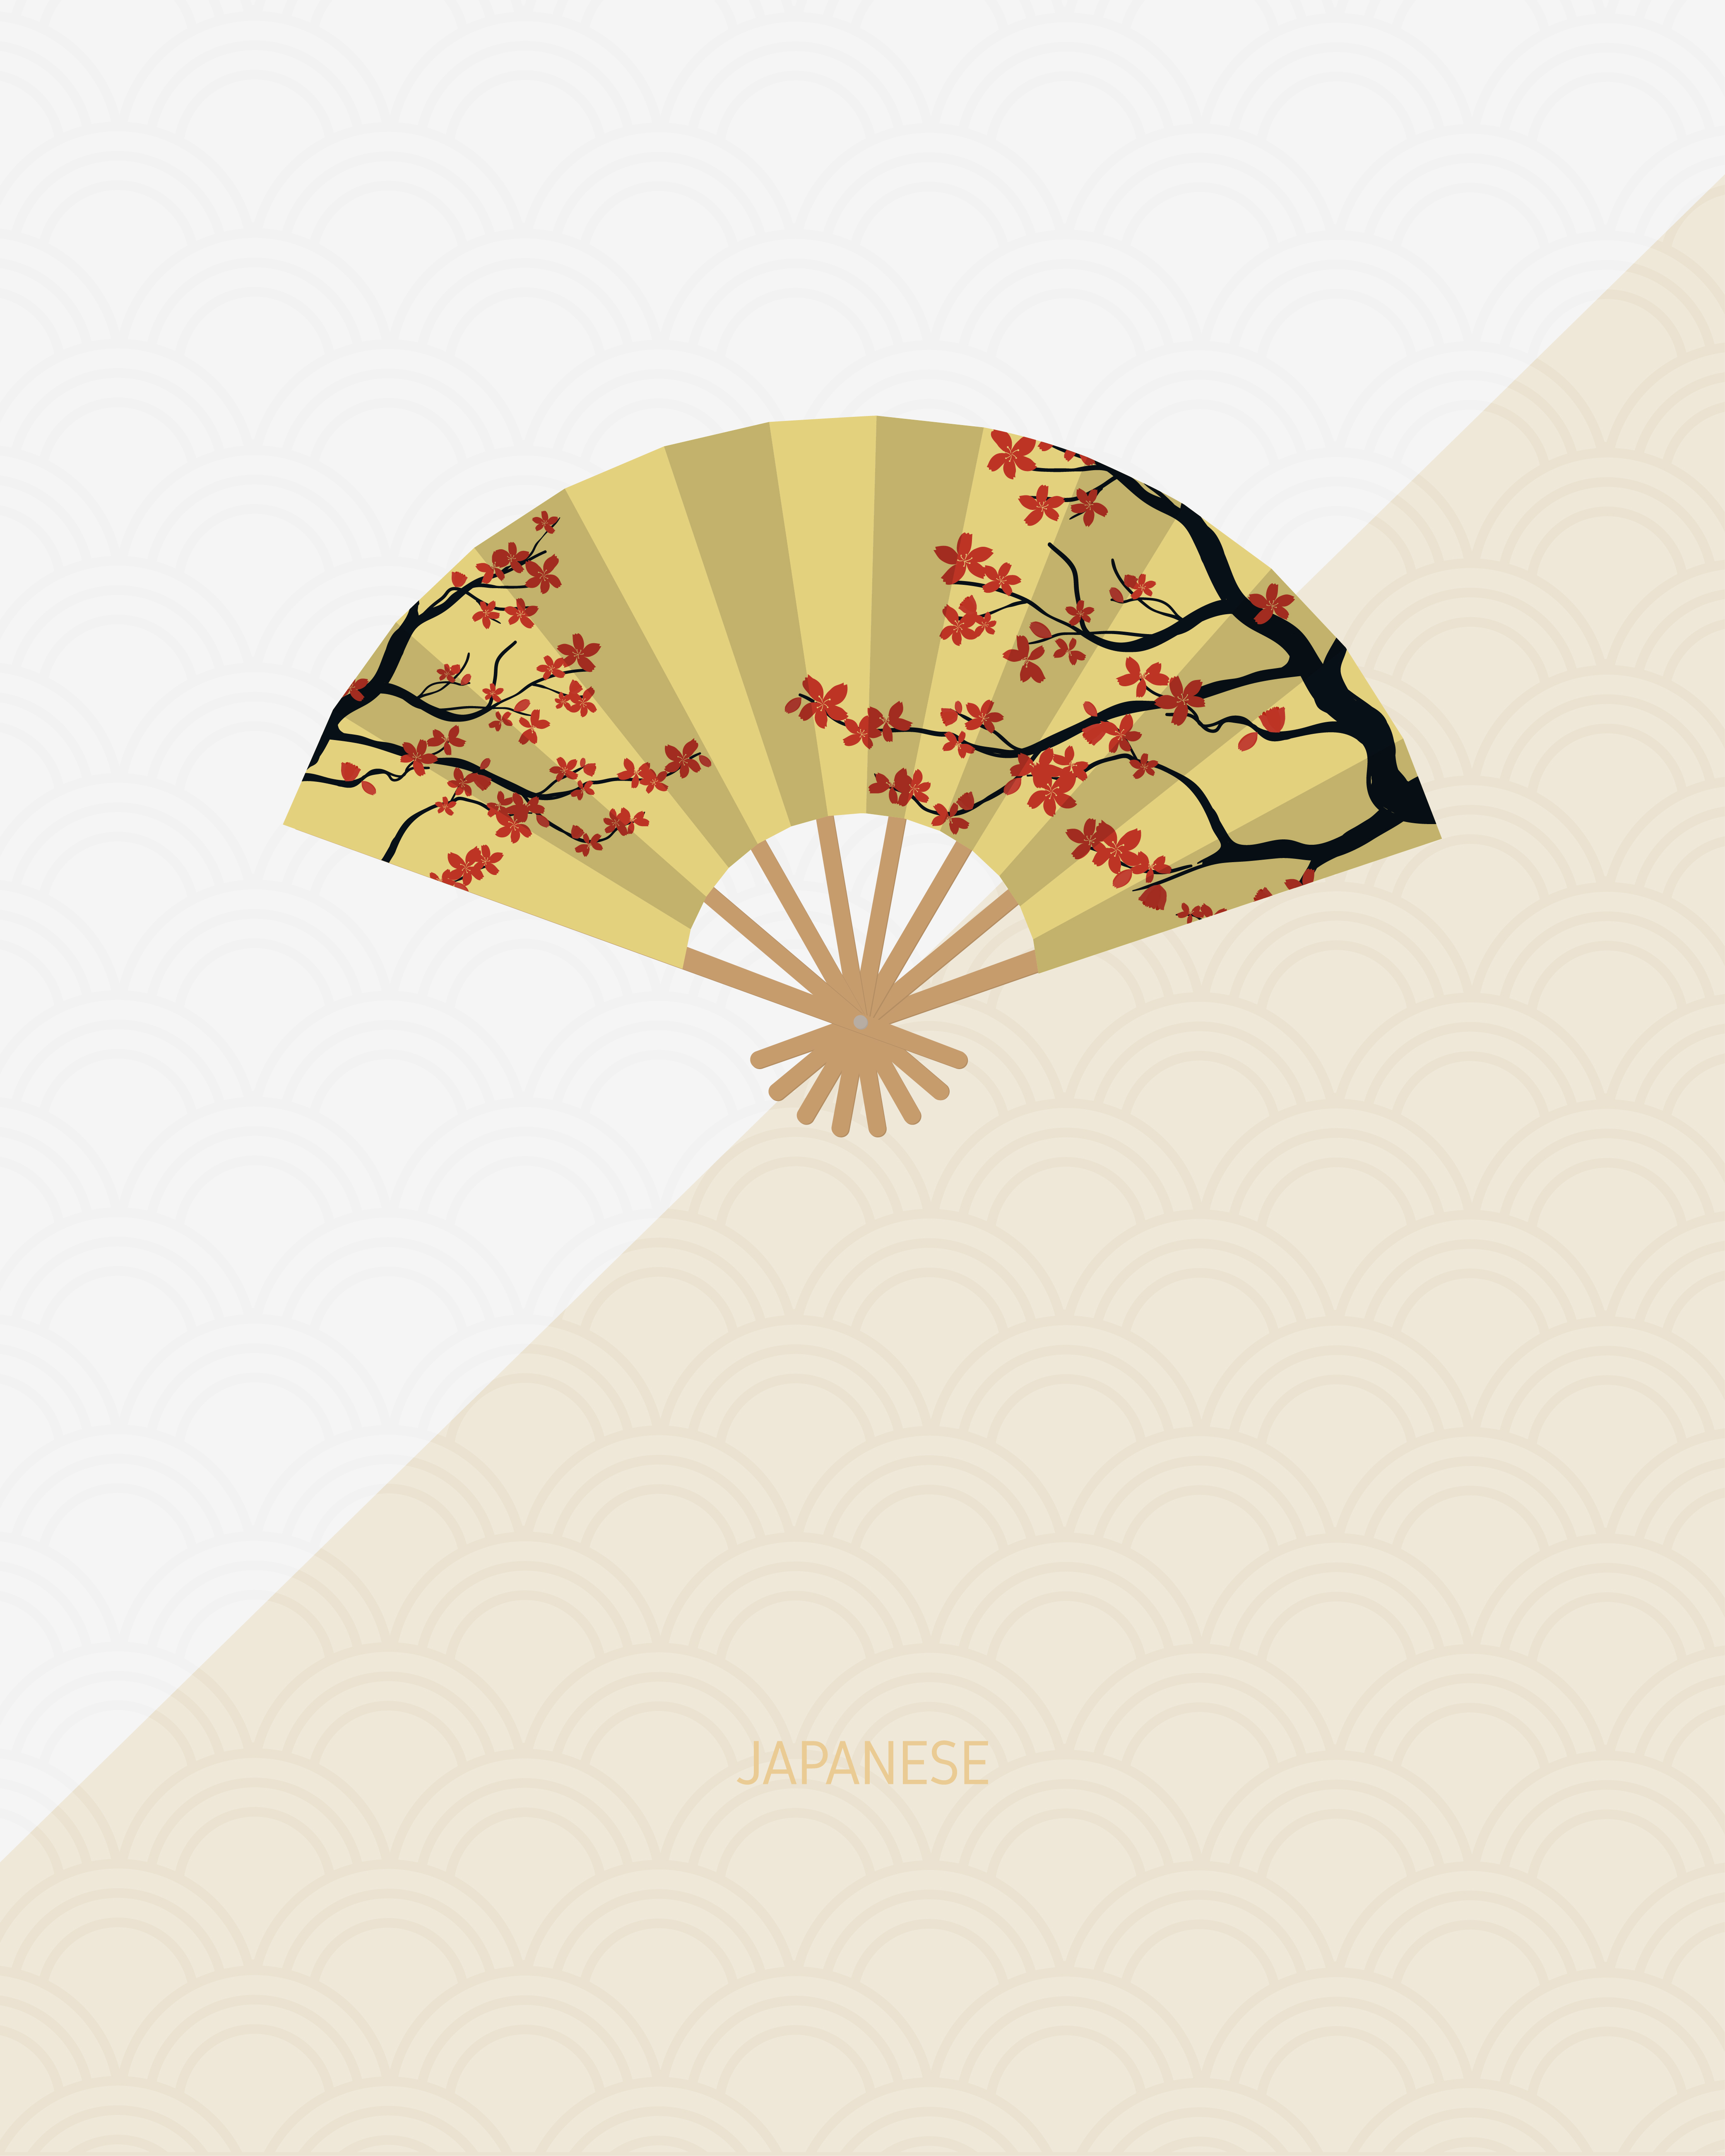 Traditional Japanese Fan with Cherry Blossom - Download Free Vectors ...